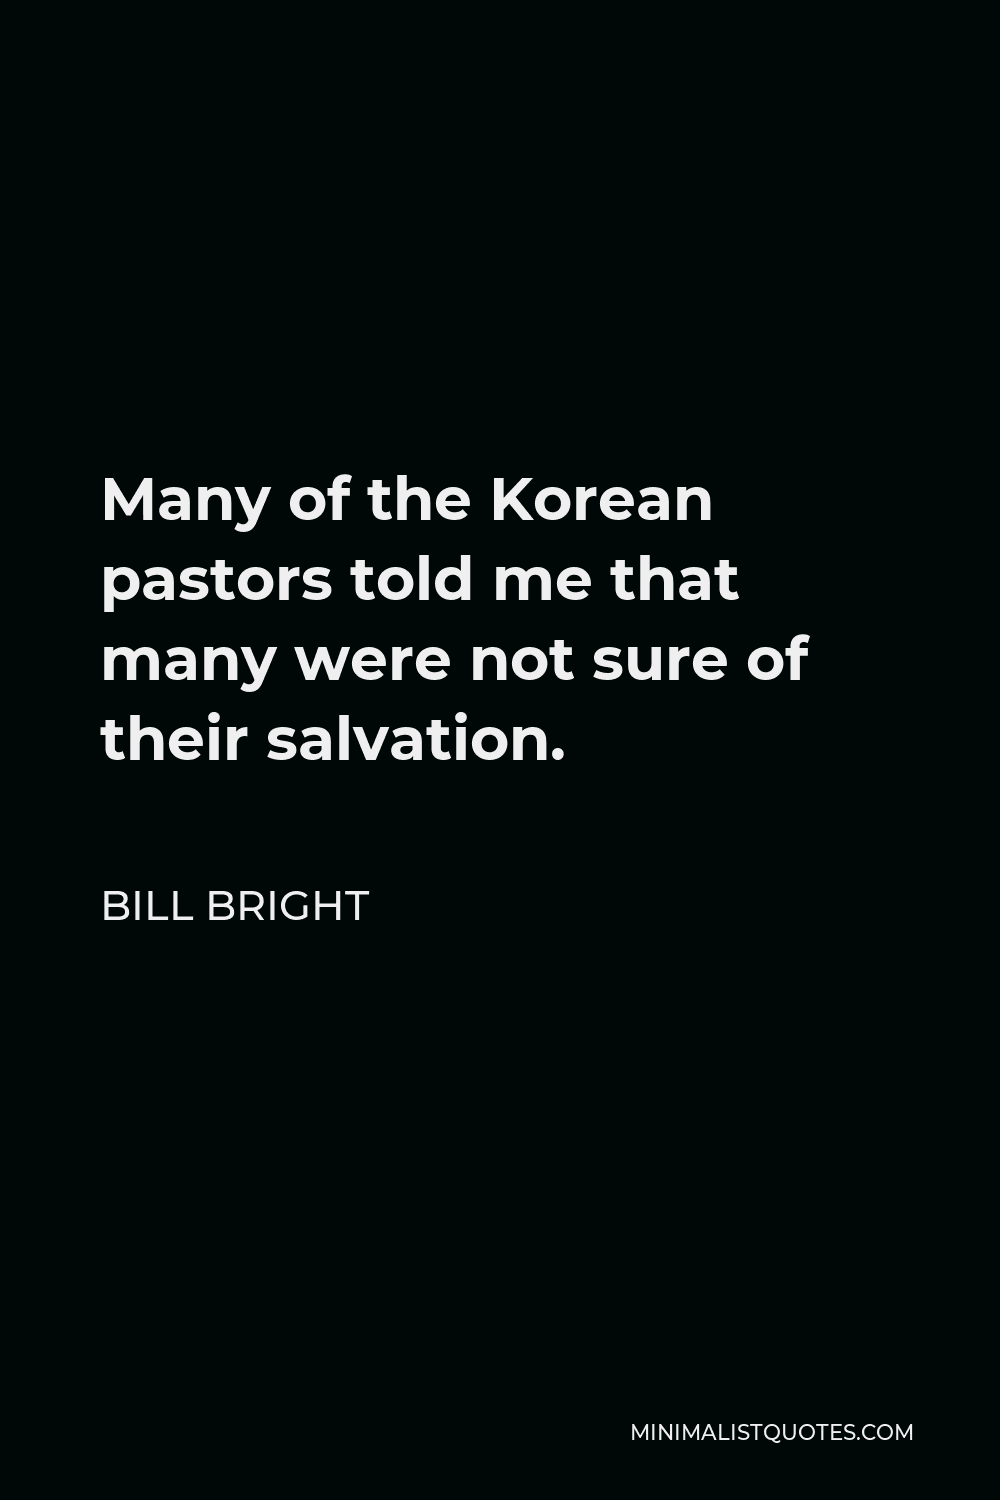 Bill Bright Quote - Many of the Korean pastors told me that many were not sure of their salvation.